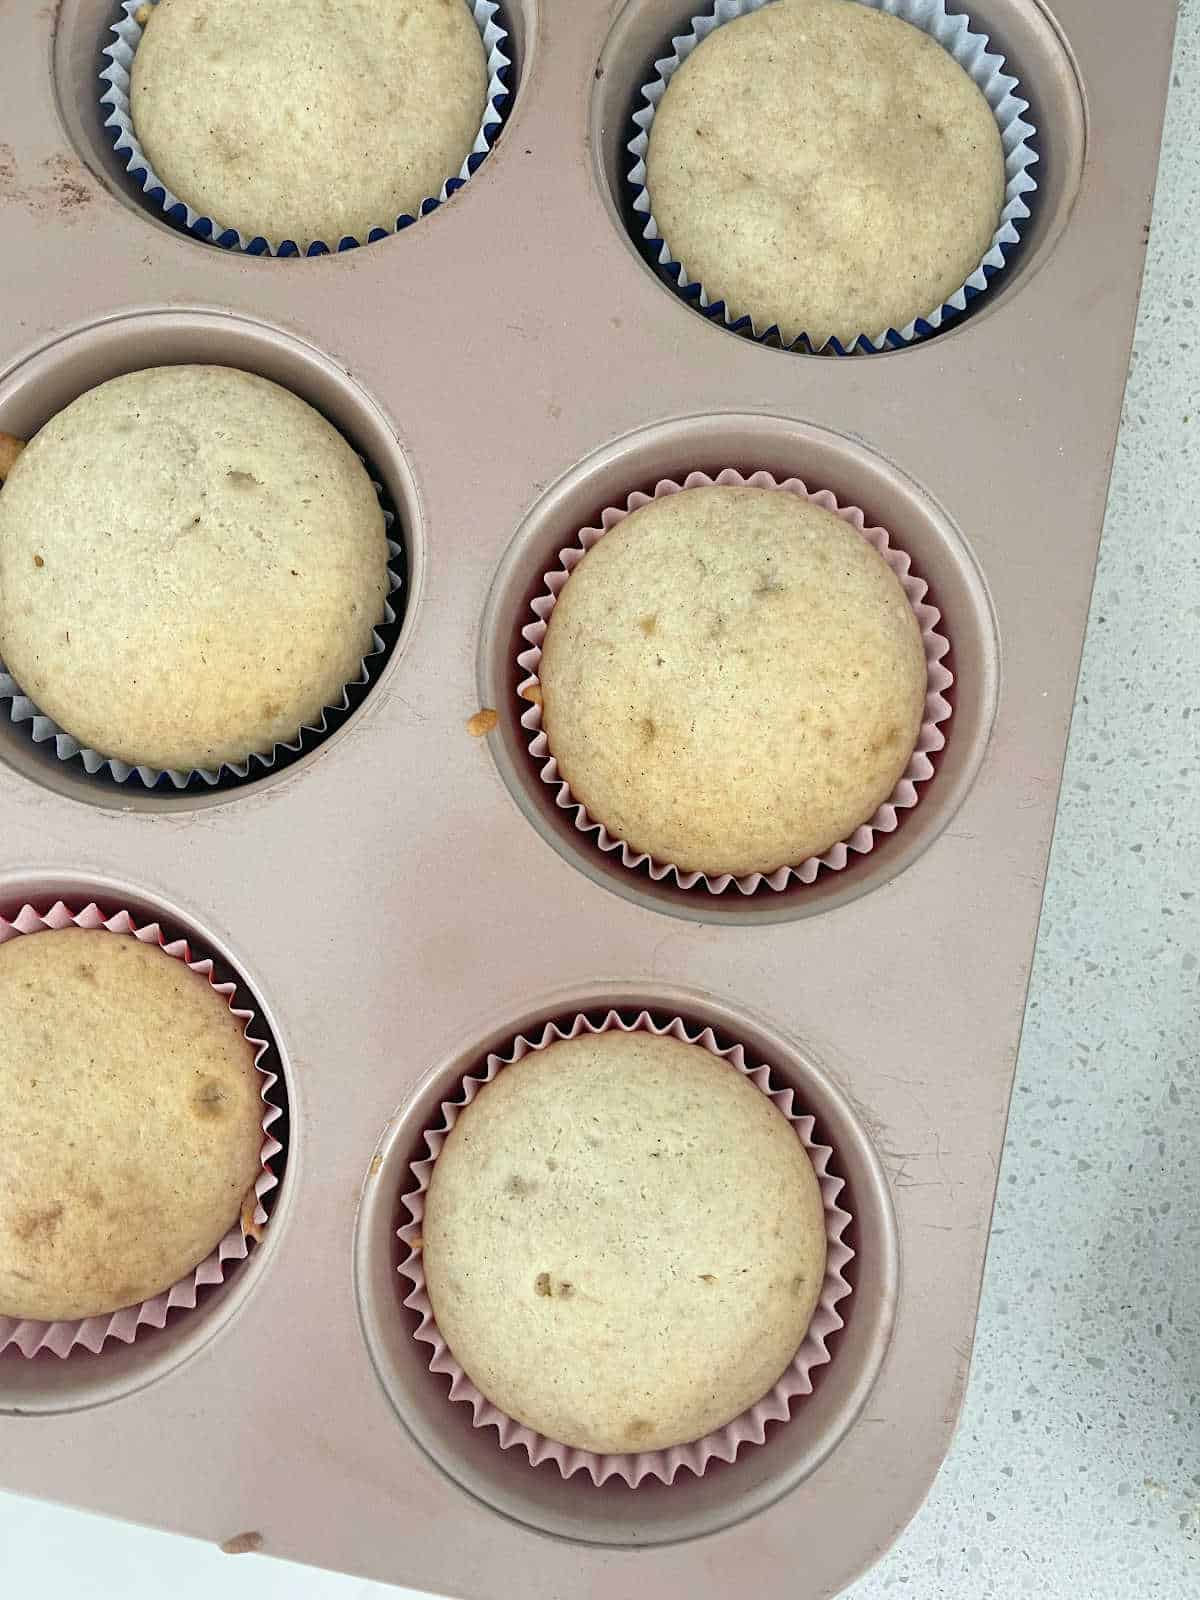 Cooked Banana Muffins in a muffin tray.